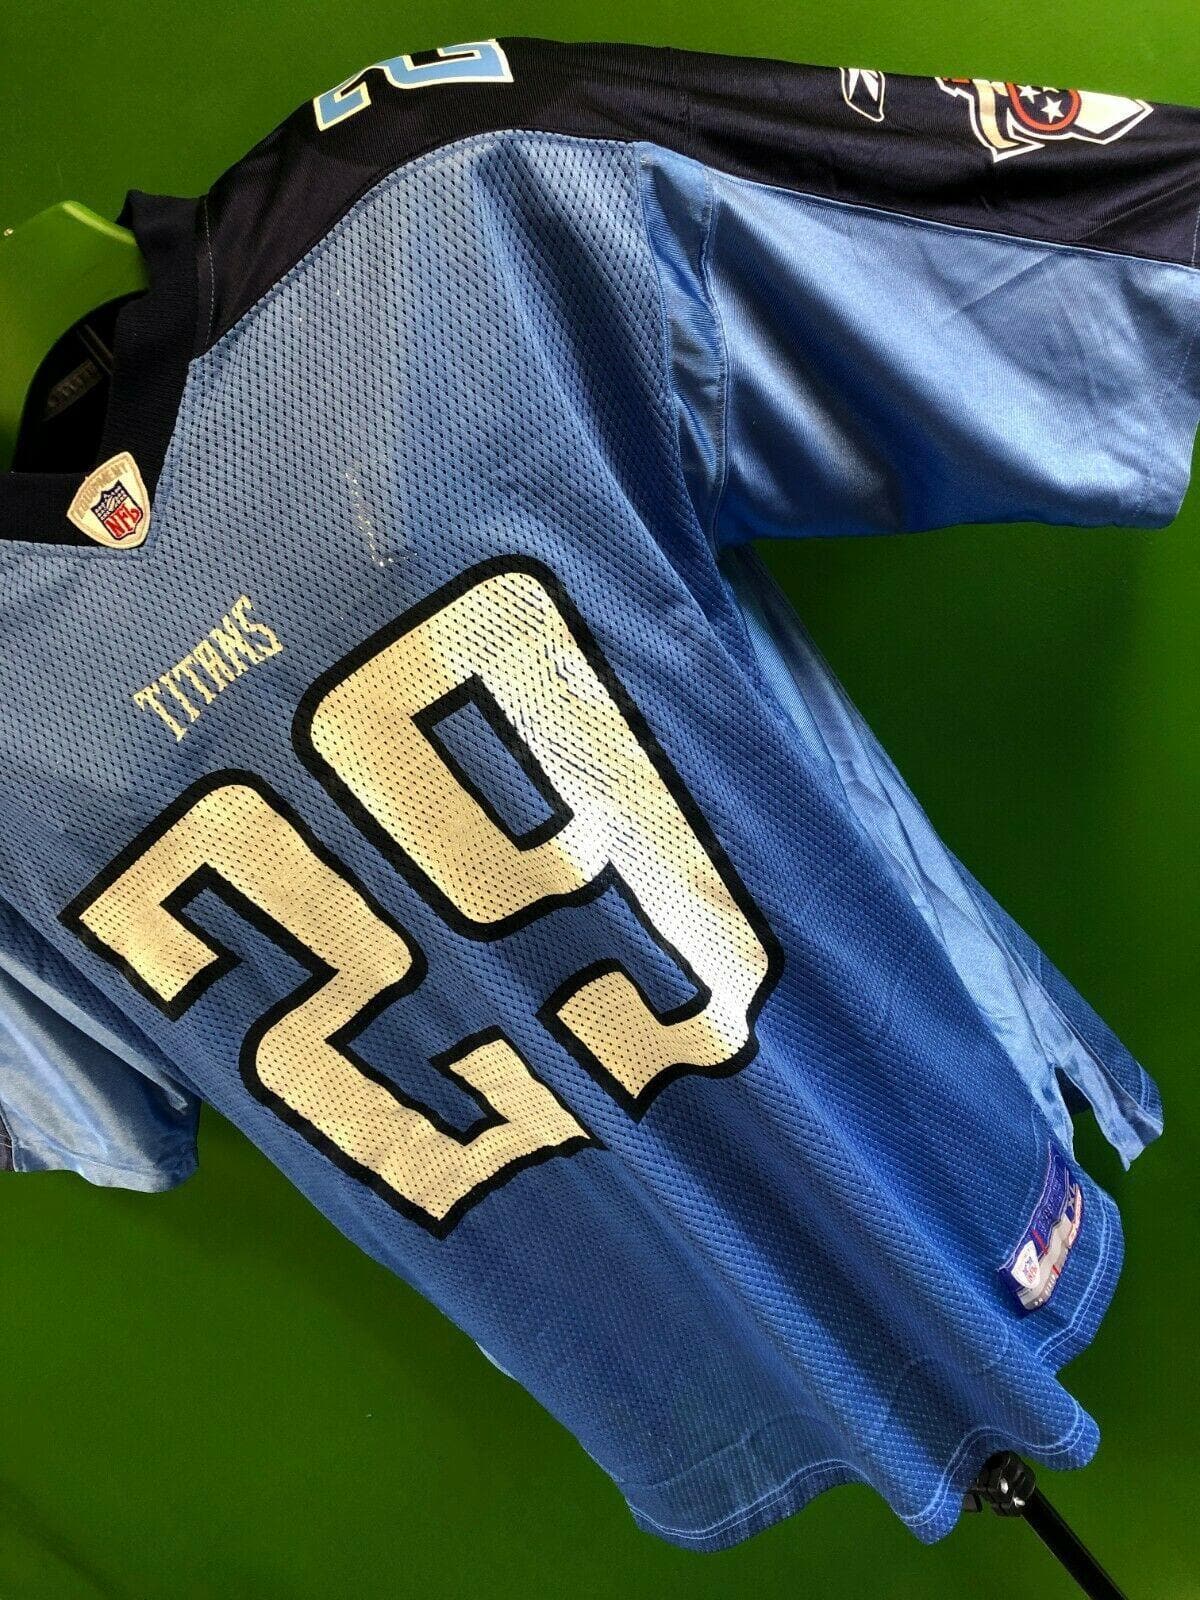 NFL Tennessee Titans Chris Brown #29 Jersey Men's X-Large